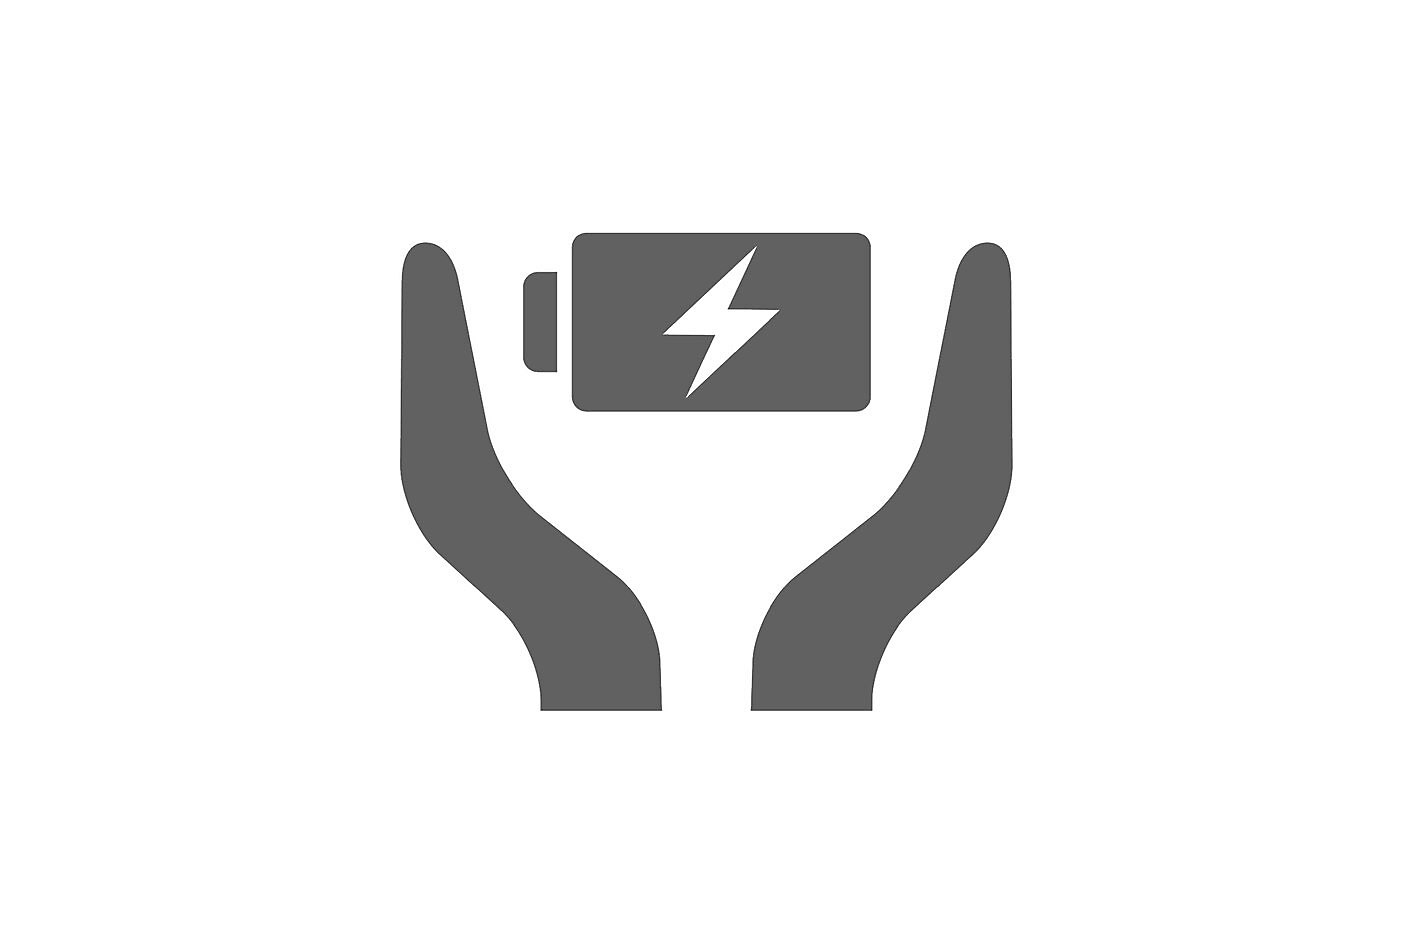 Image of the 25 hour battery life icon